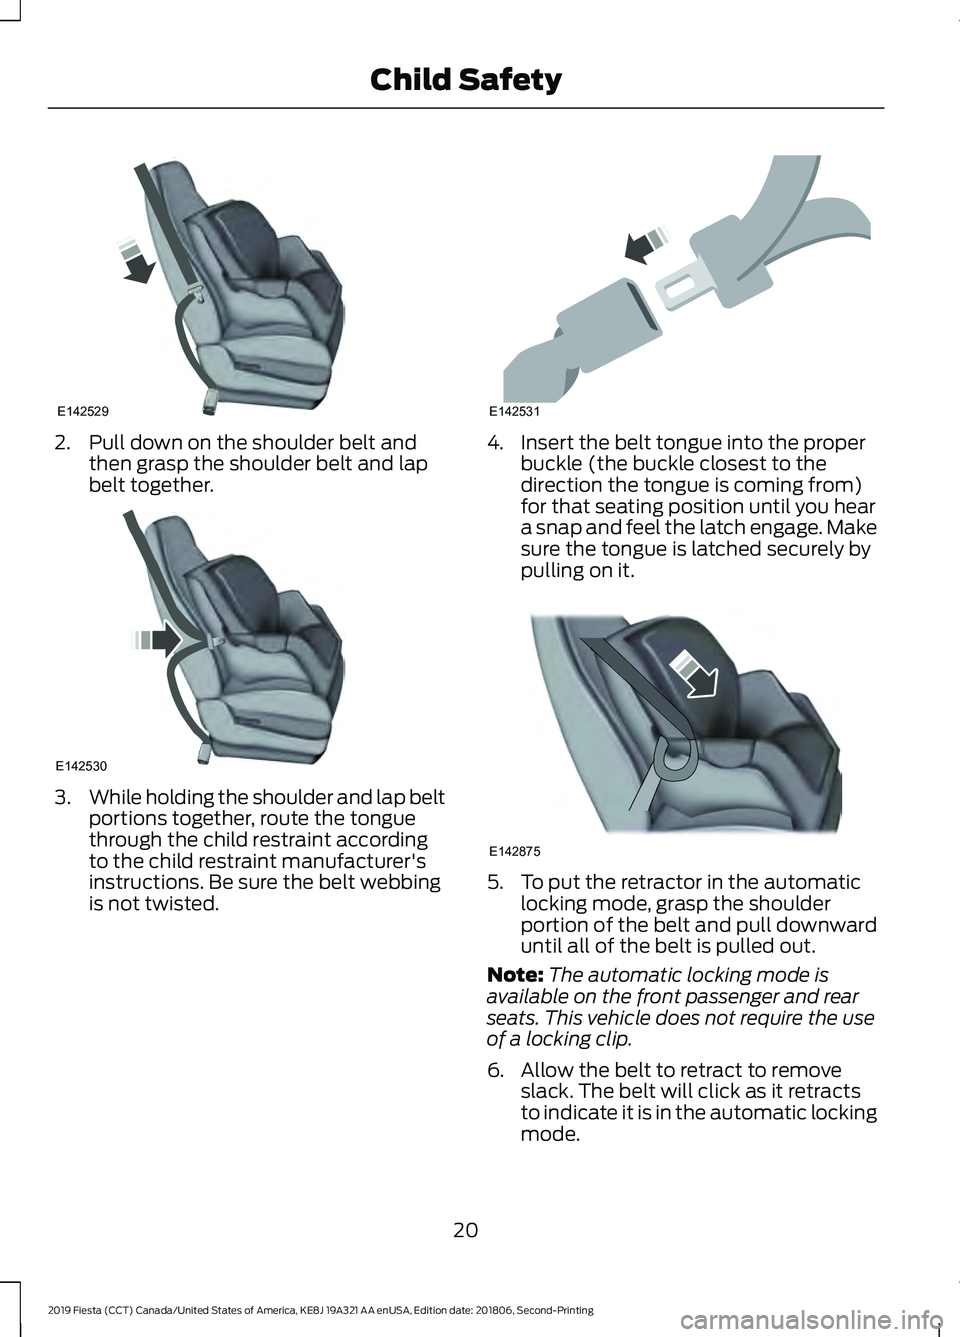 FORD FIESTA 2019  Owners Manual 2. Pull down on the shoulder belt and
then grasp the shoulder belt and lap
belt together. 3.
While holding the shoulder and lap belt
portions together, route the tongue
through the child restraint acc